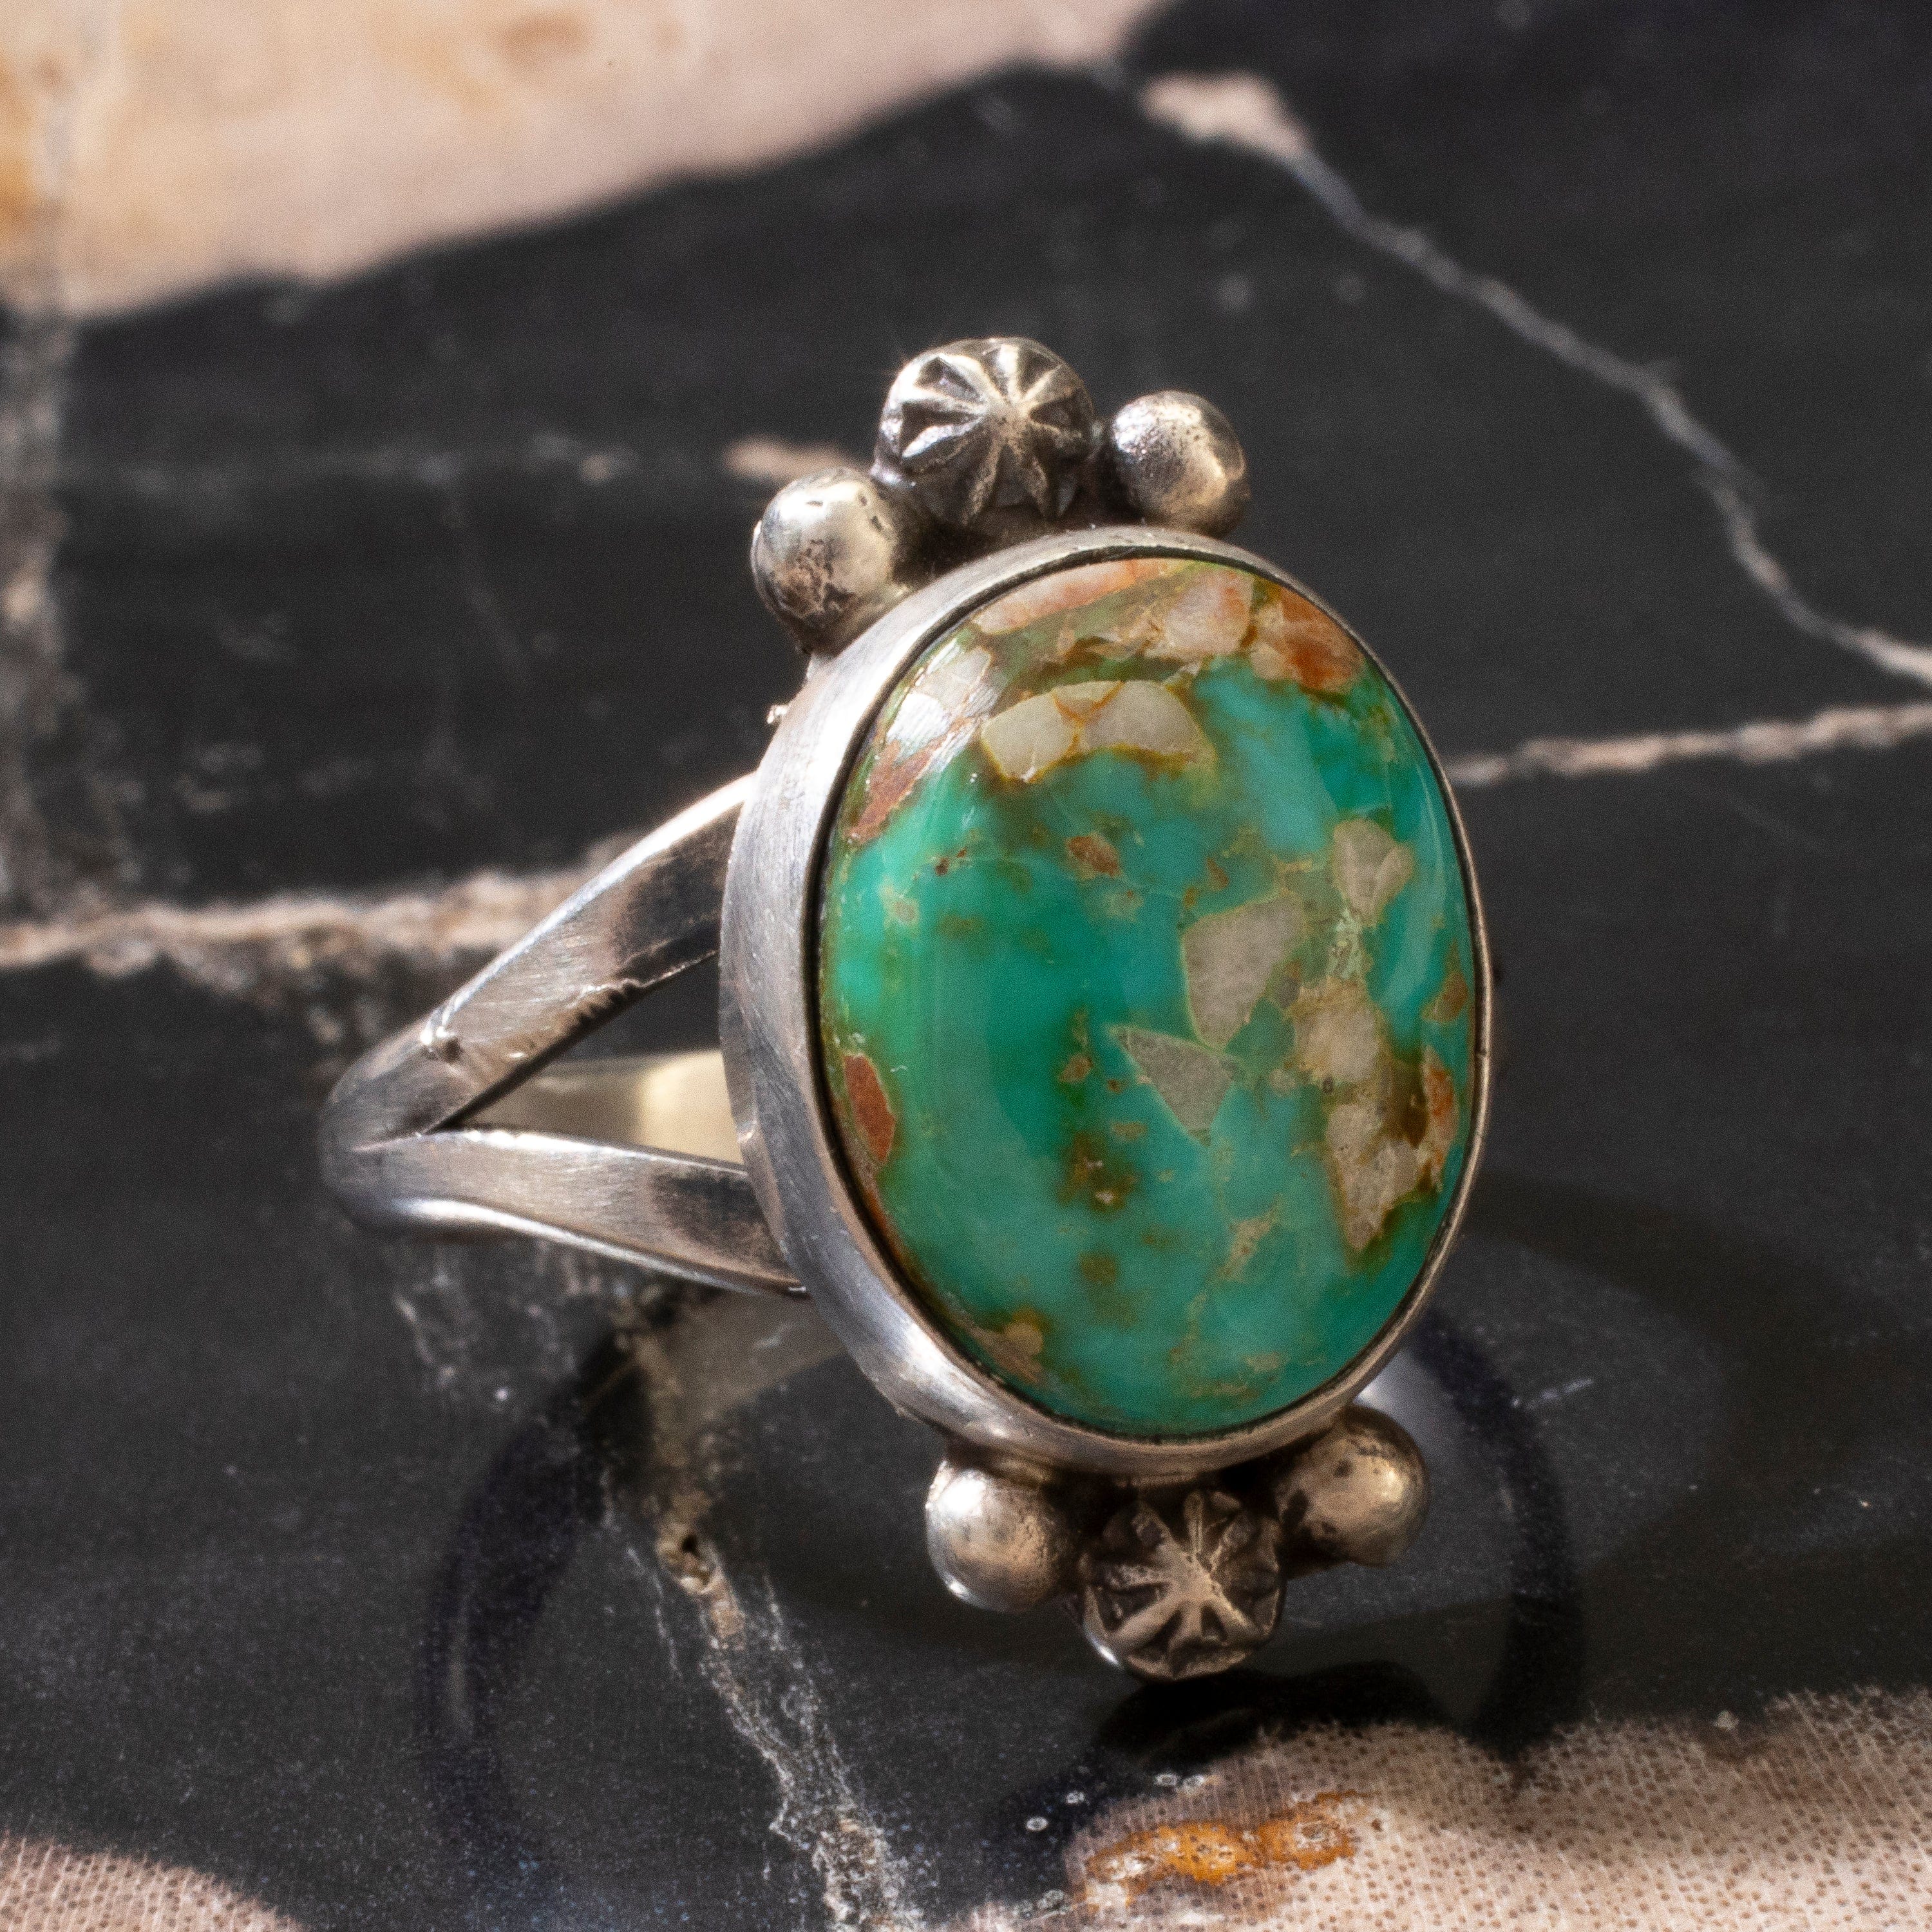 Kalifano Native American Jewelry 8.5 Scott Skeets Royston Turquoise Navajo USA Native American Made 925 Sterling Silver Ring NAR600.078.85